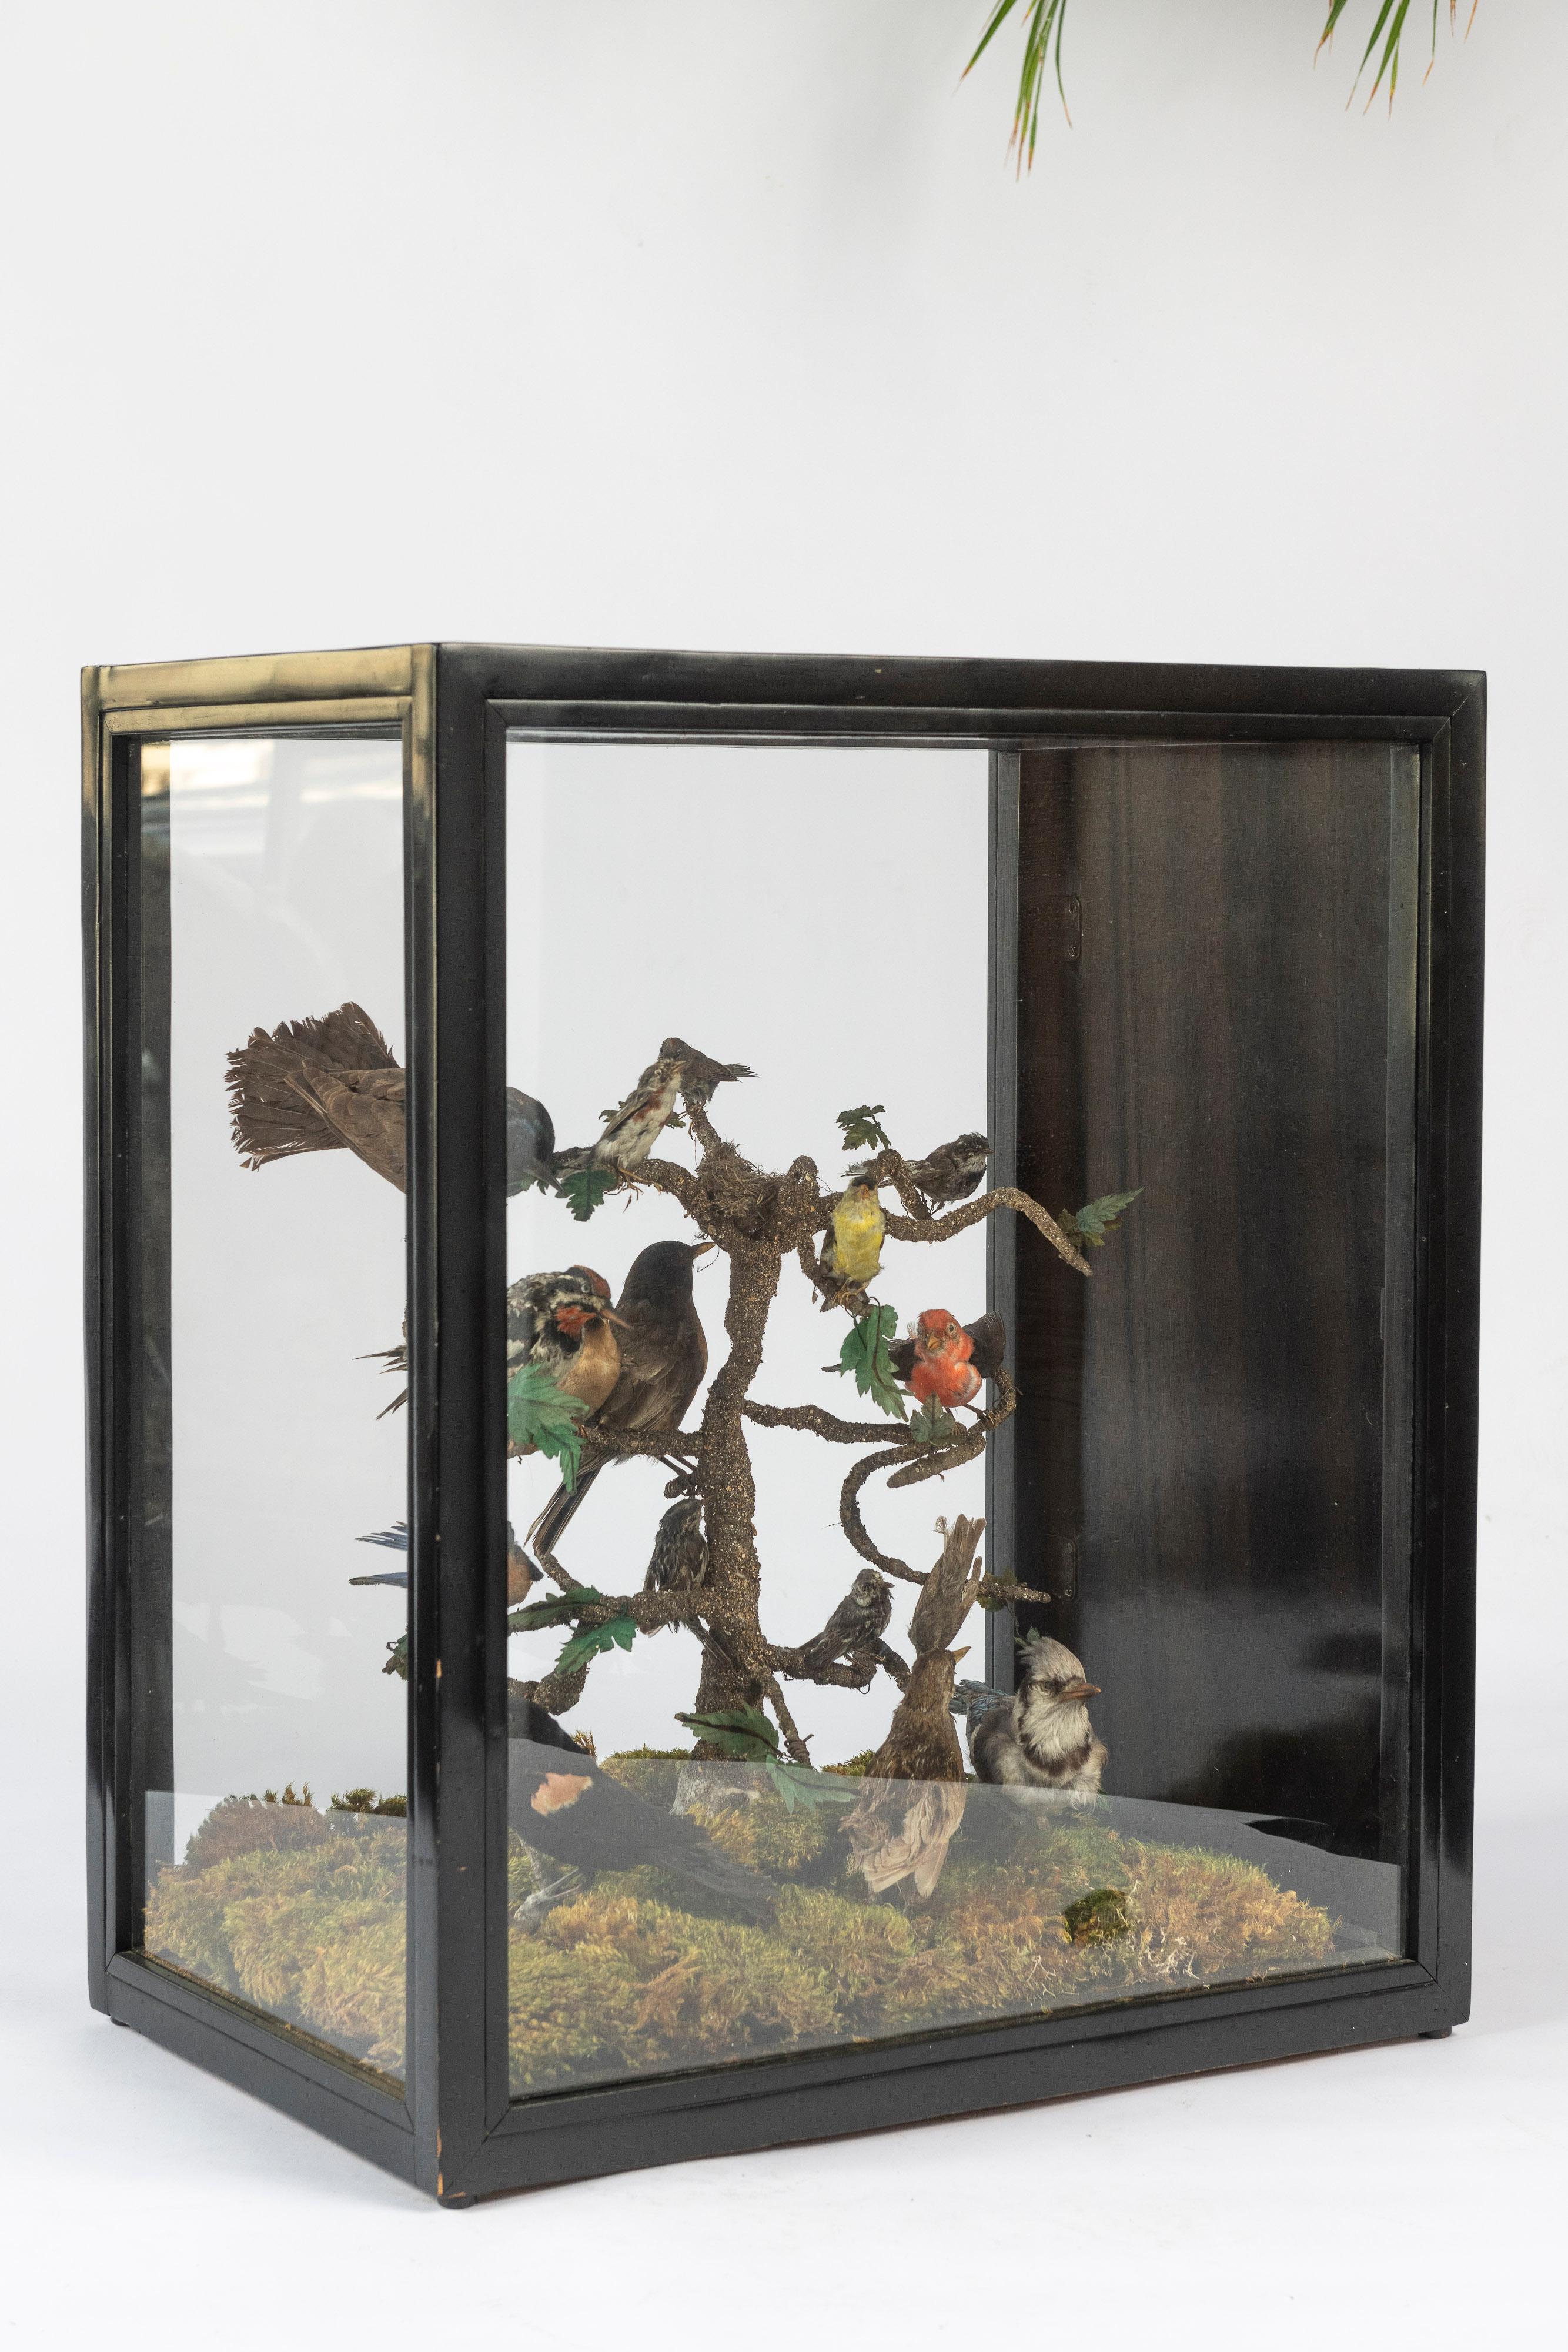 This 19th Century taxidermy showcase is not merely a historical artifact but a glimpse into the time when scientific discovery, natural history, and artistic expression converged in captivating displays of the natural world. The box contains 16